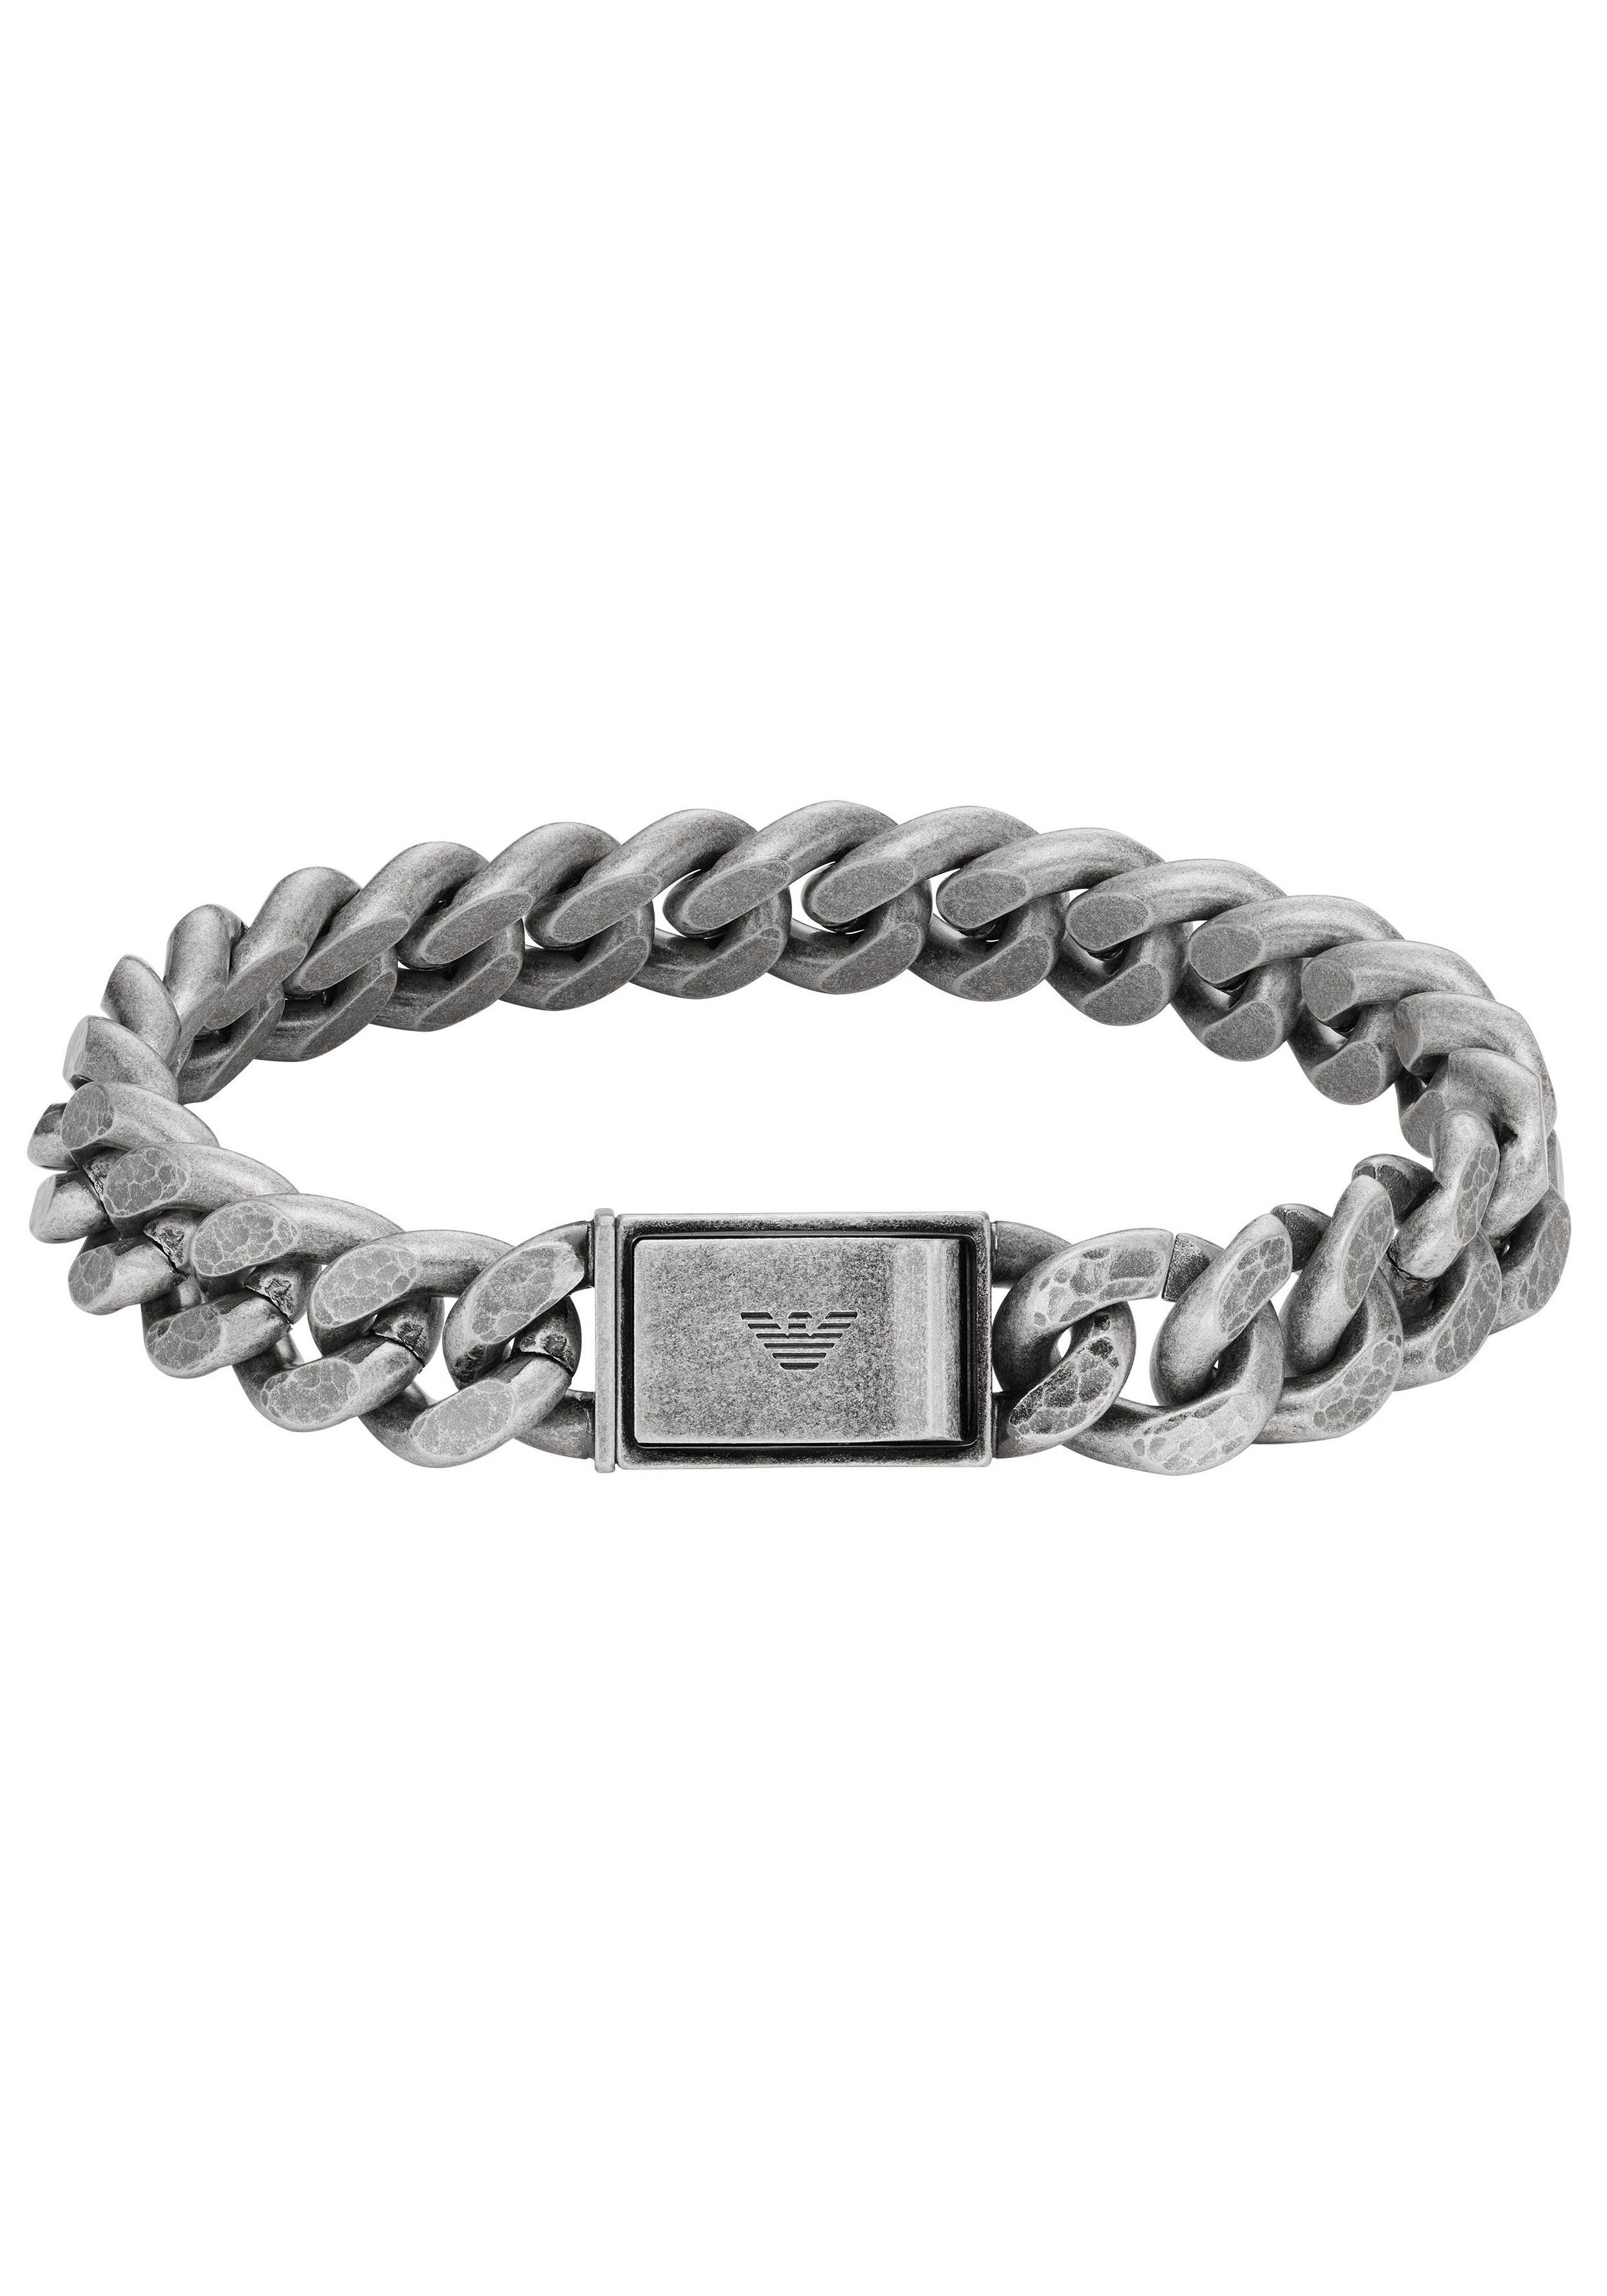 Emporio Armani Armband ICONIC TREND, CHAINED, EGS3036040, Edelstahl